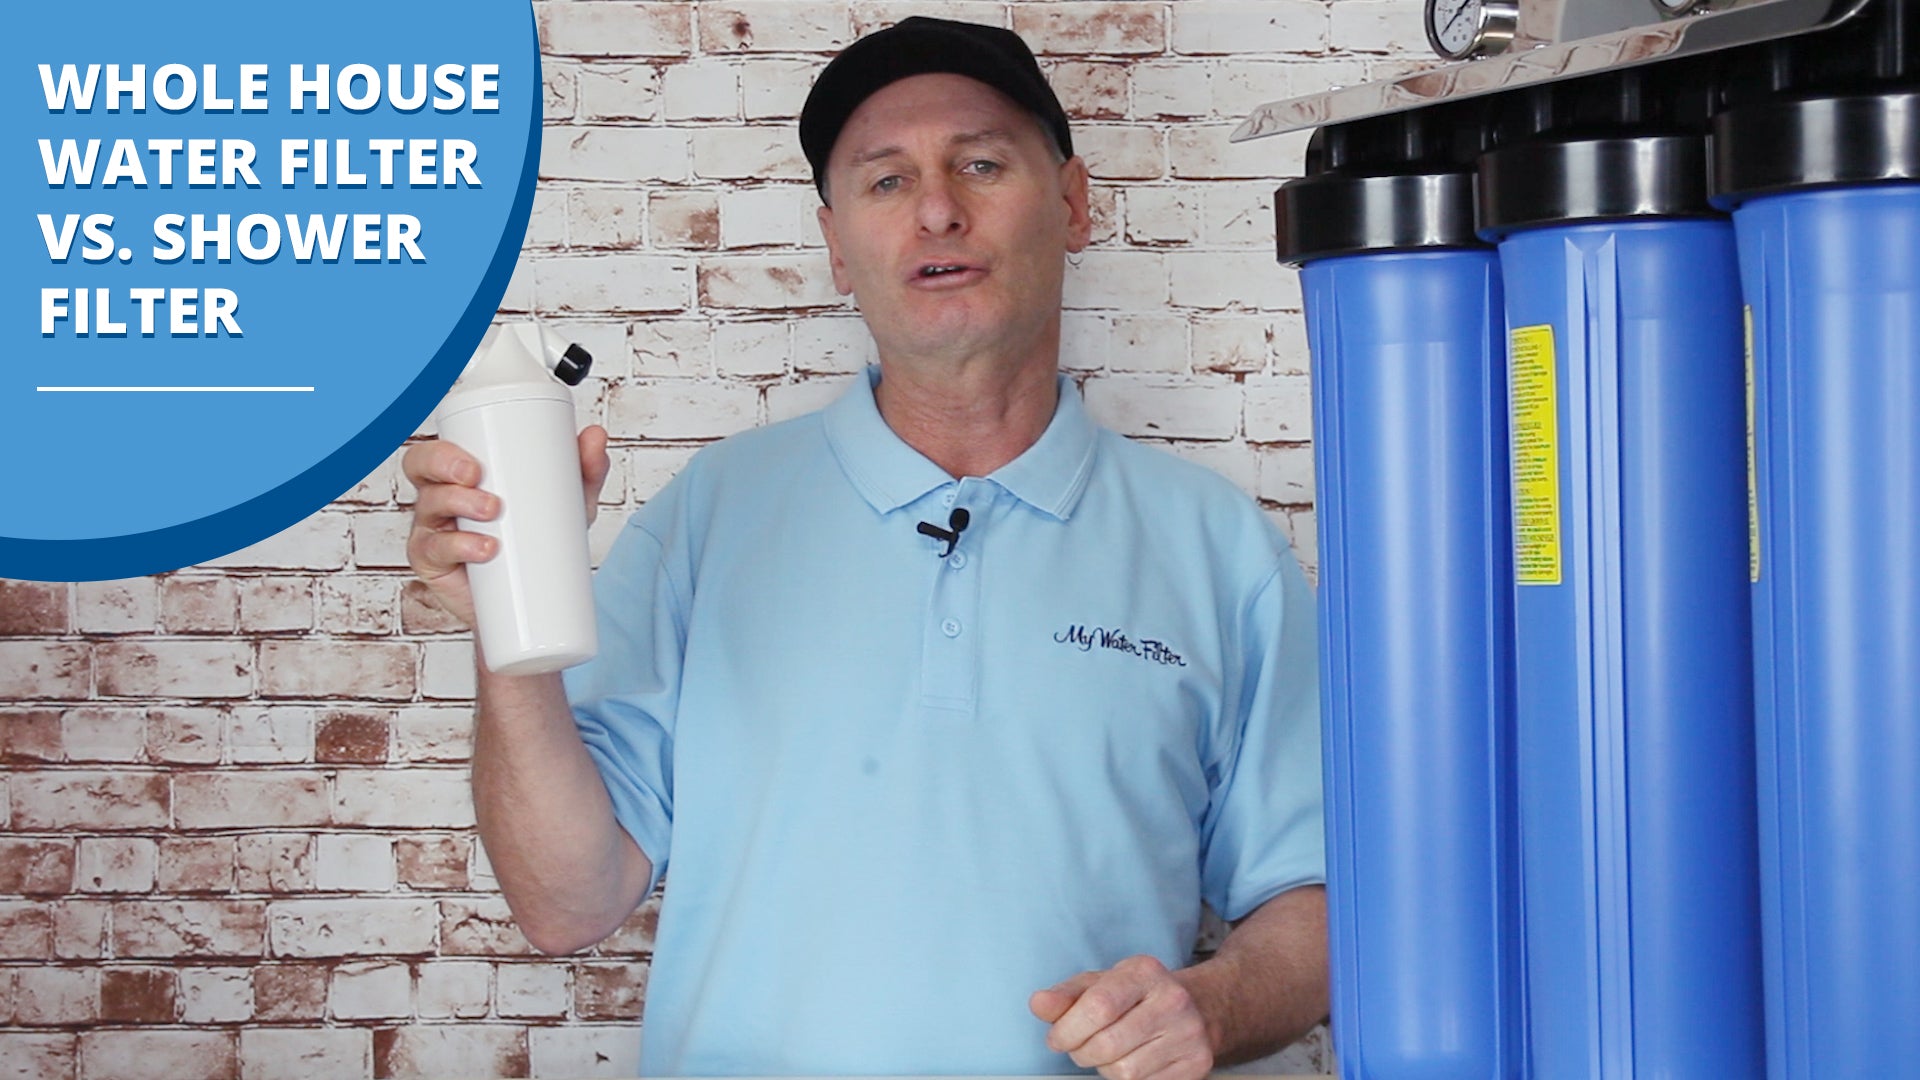 Water Filter Comparison - Whole House Water Filter Vs. Shower Filter [VIDEO] 